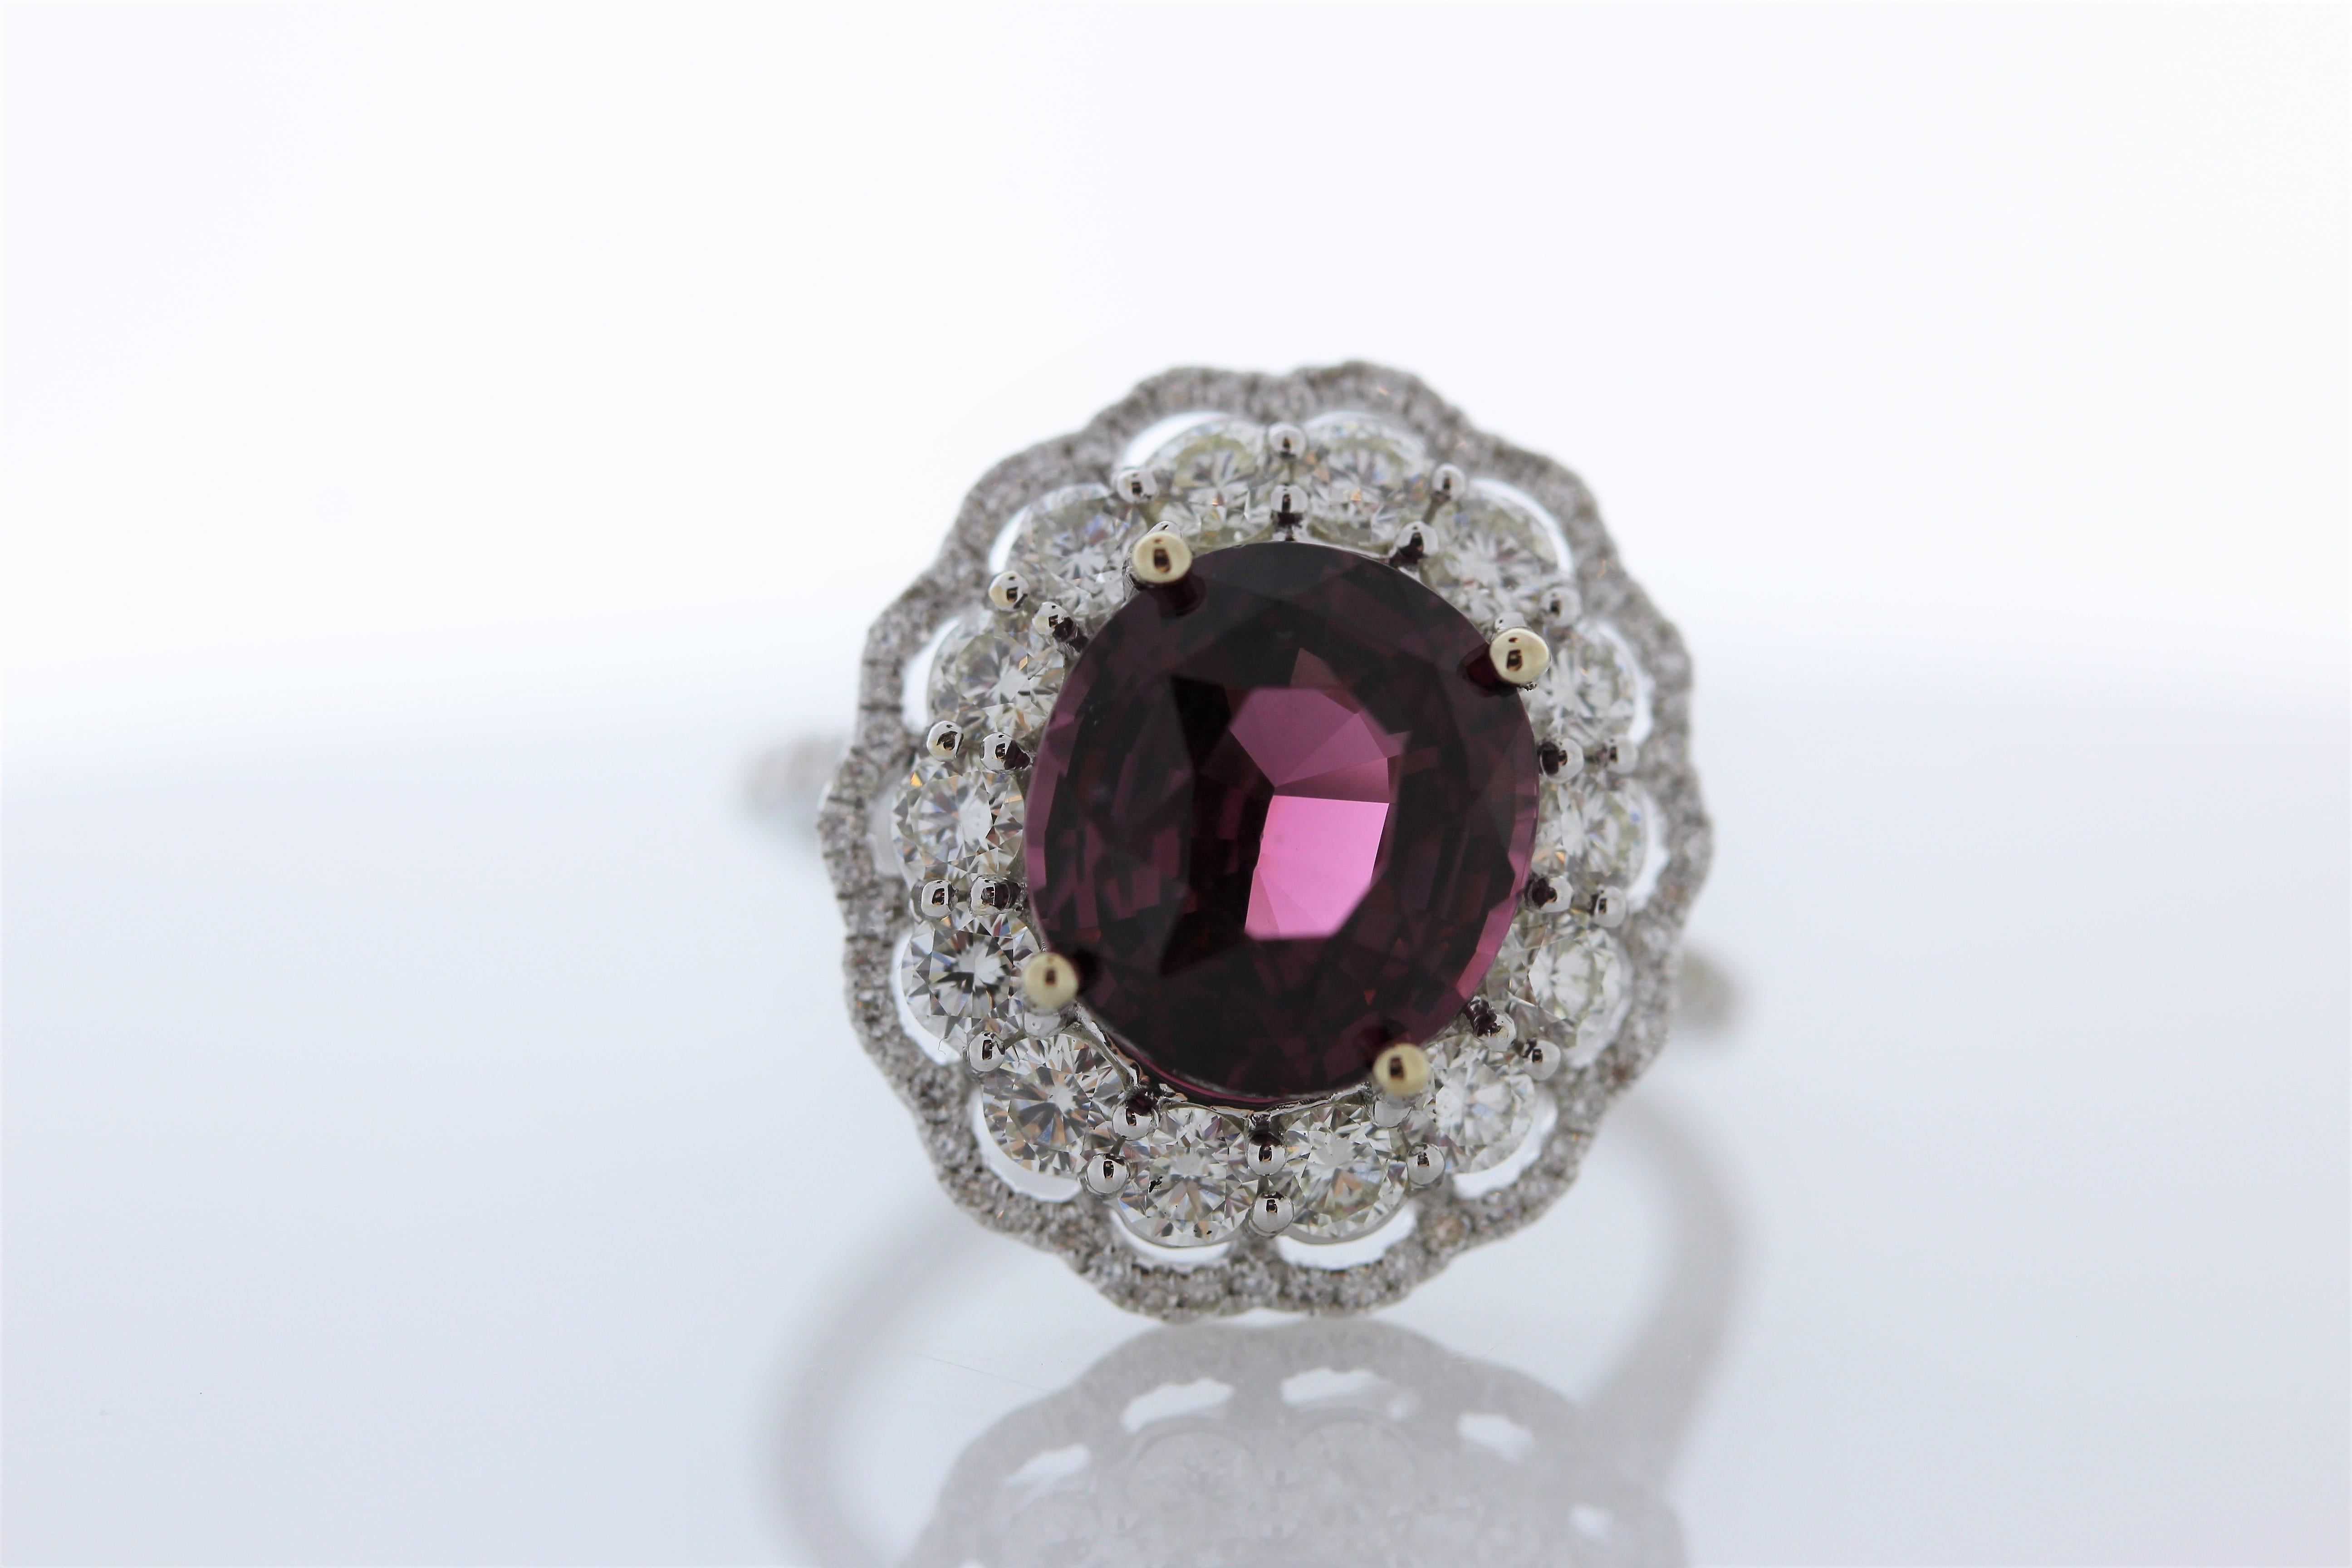 This is a certified 5.13 carat fine round cut spinel. The gem source is Sri Lanka; its color is vivid purple pink. The bold color of this spinel is sought after and skillfully contrasted by 1.37carats of mixed cut brilliant diamonds that surround it